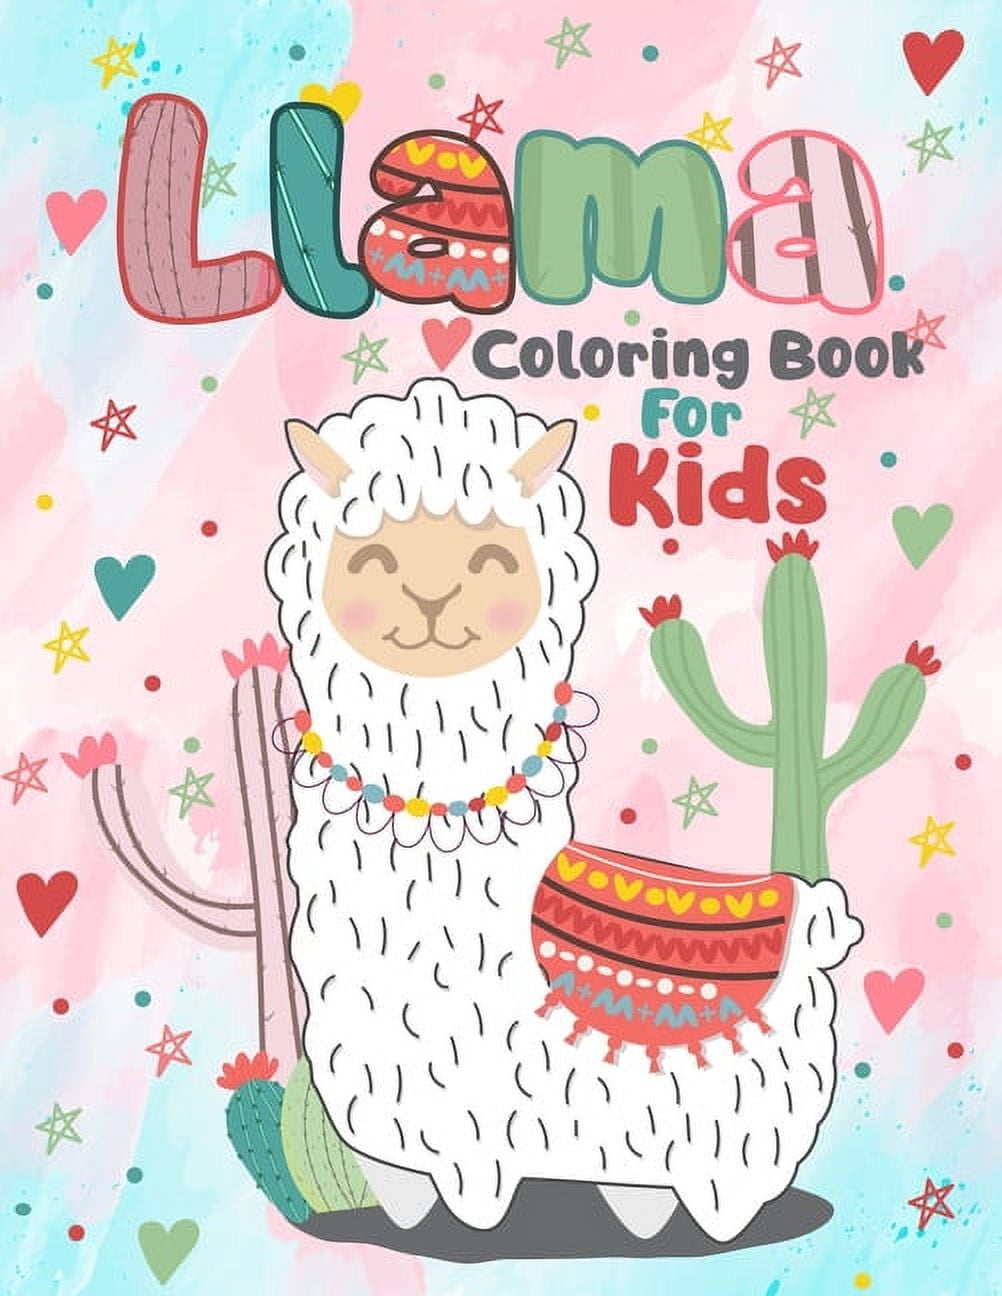 The Llama Thanksgiving Coloring Book for Kids: for Kids Ages 4-8 A